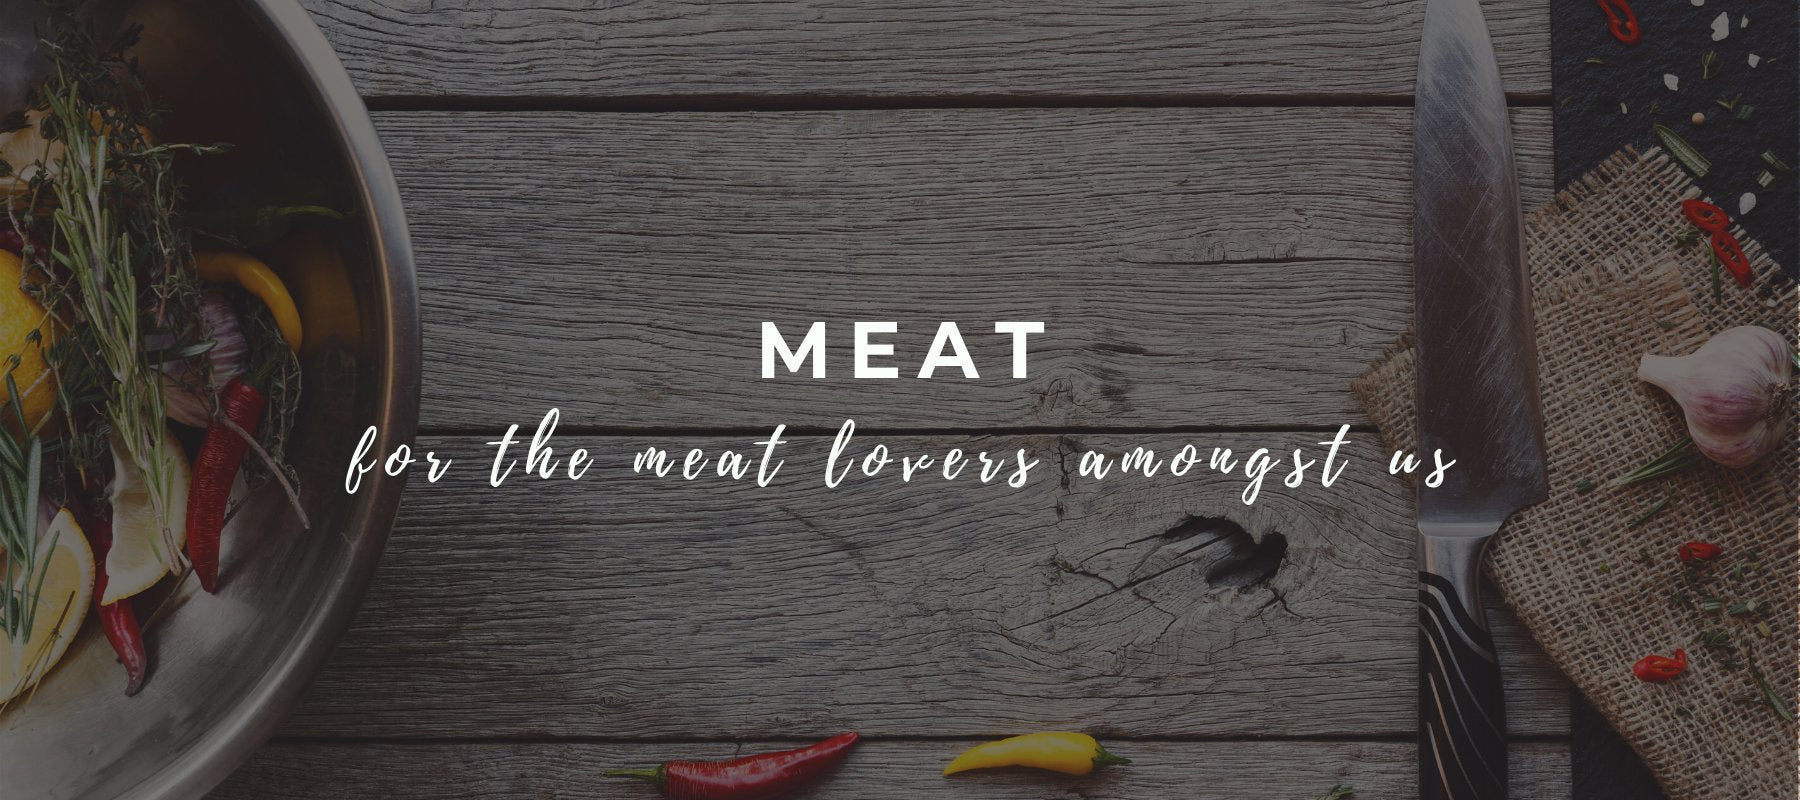 Meat - FoodSt